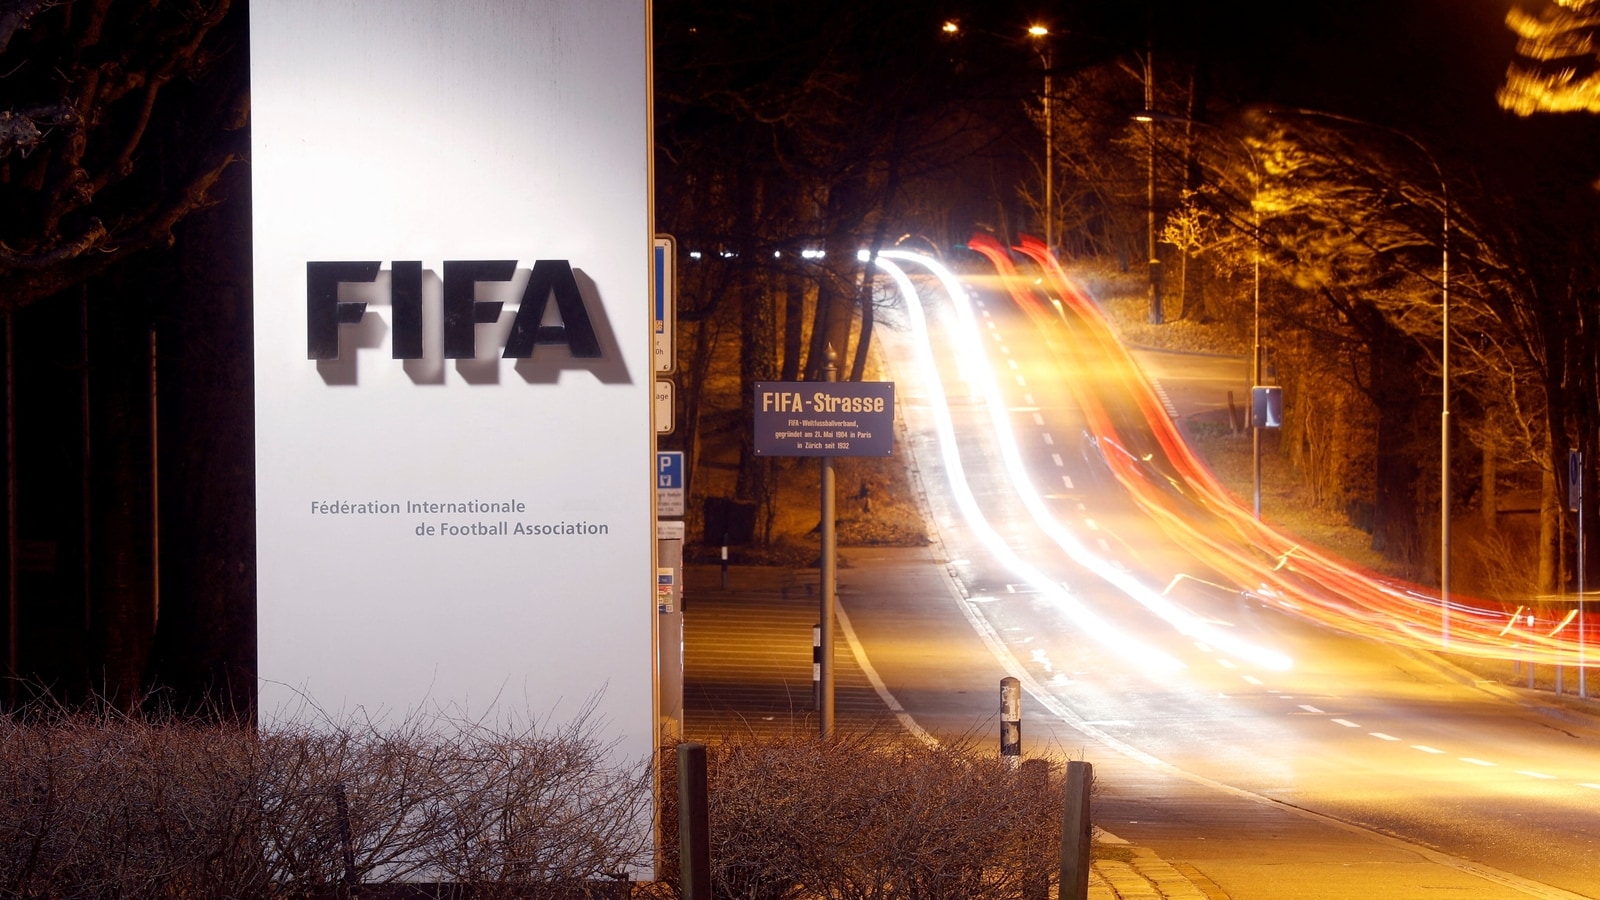 FIFA set to suspend Russia from internationals: Source